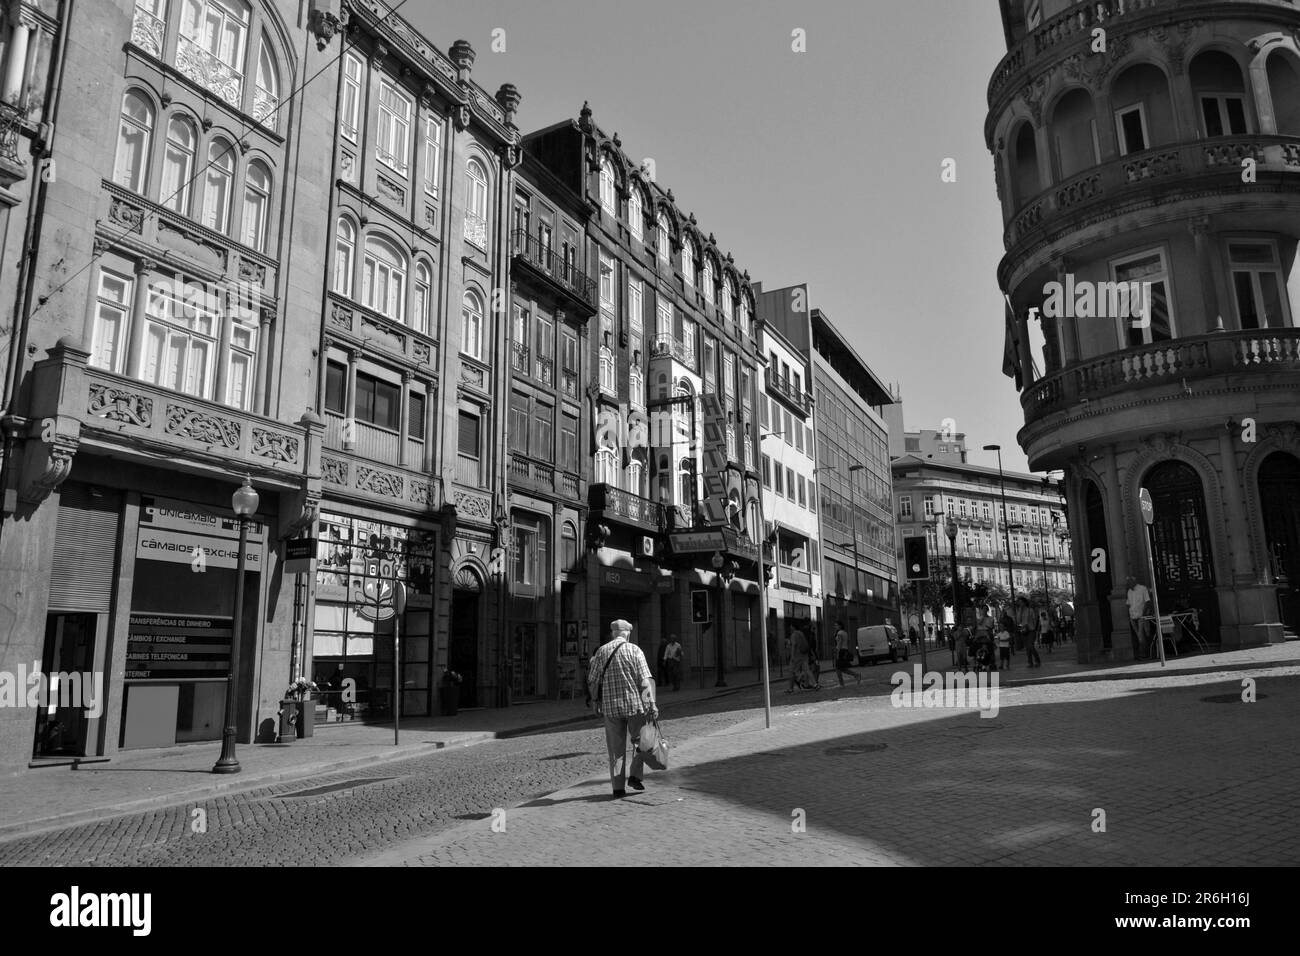 Several facades in Porto City, august 2015 17th. Focus on a street with 1900s buildings. One of them is probably with Art Deco style. Stock Photo